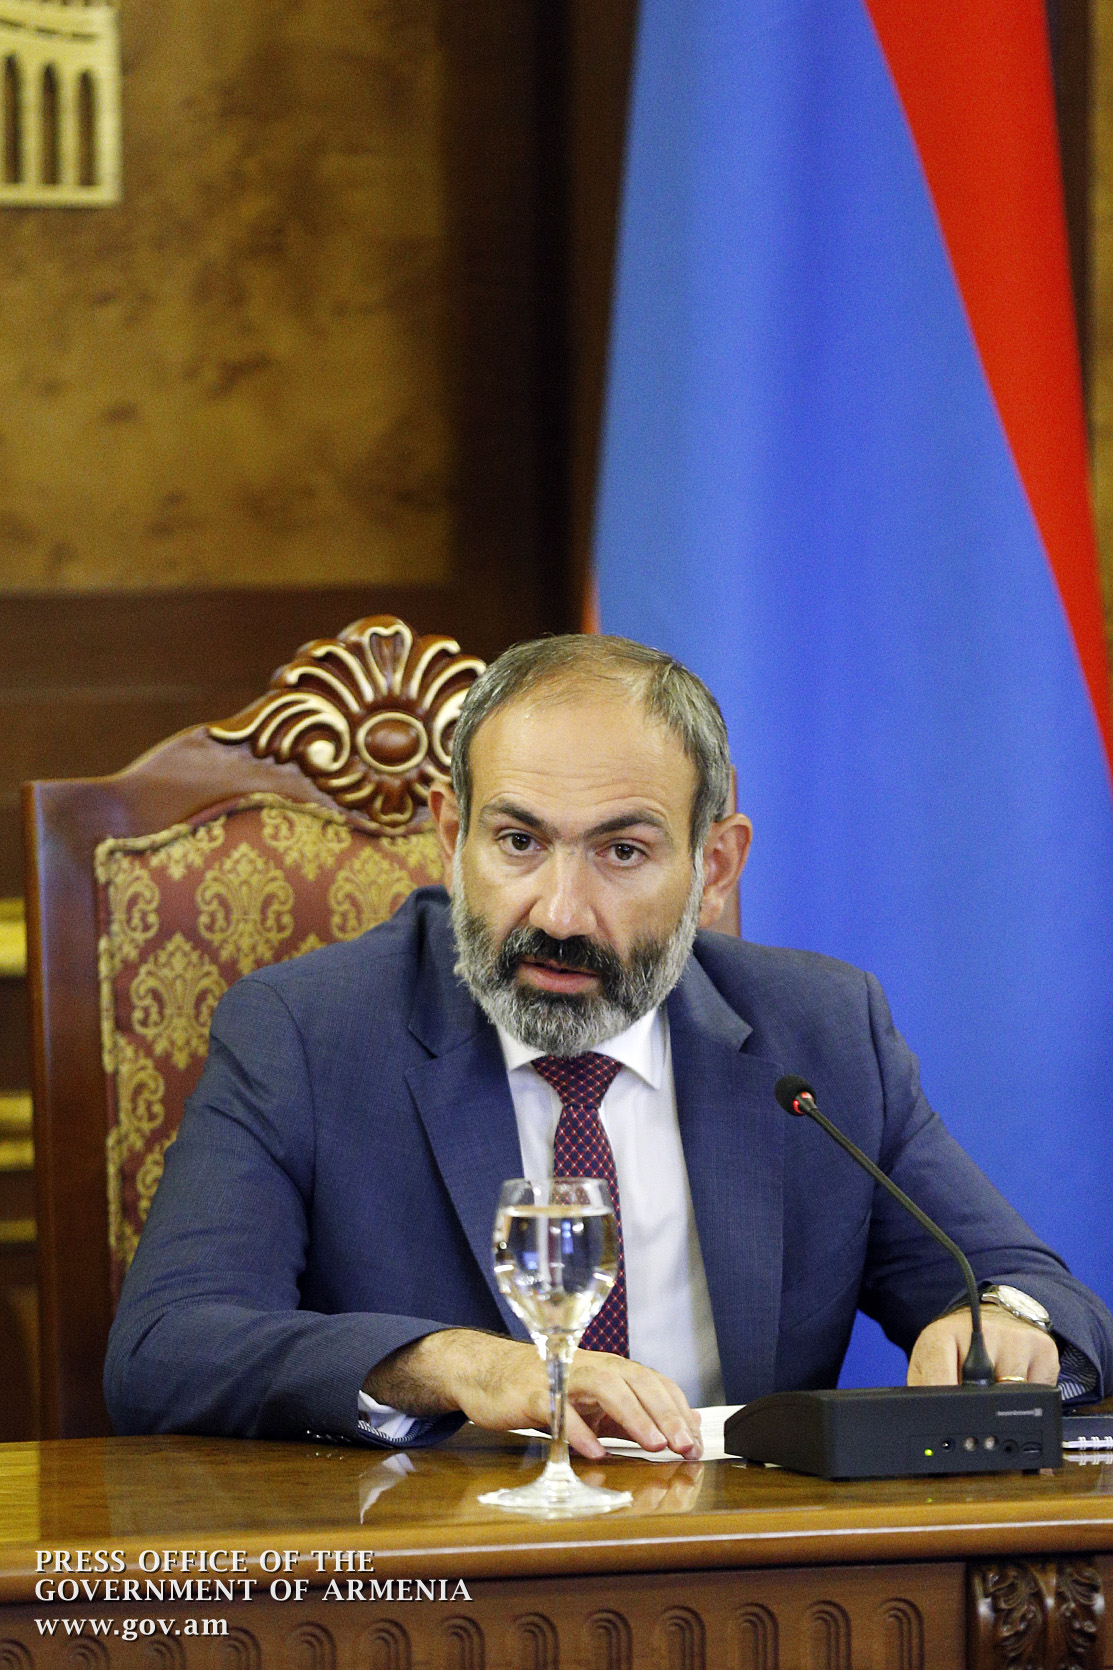 Nikol Pashinyan: “We should try to convey our public, national and all-national aspirations in the mid-term expenditure framework”